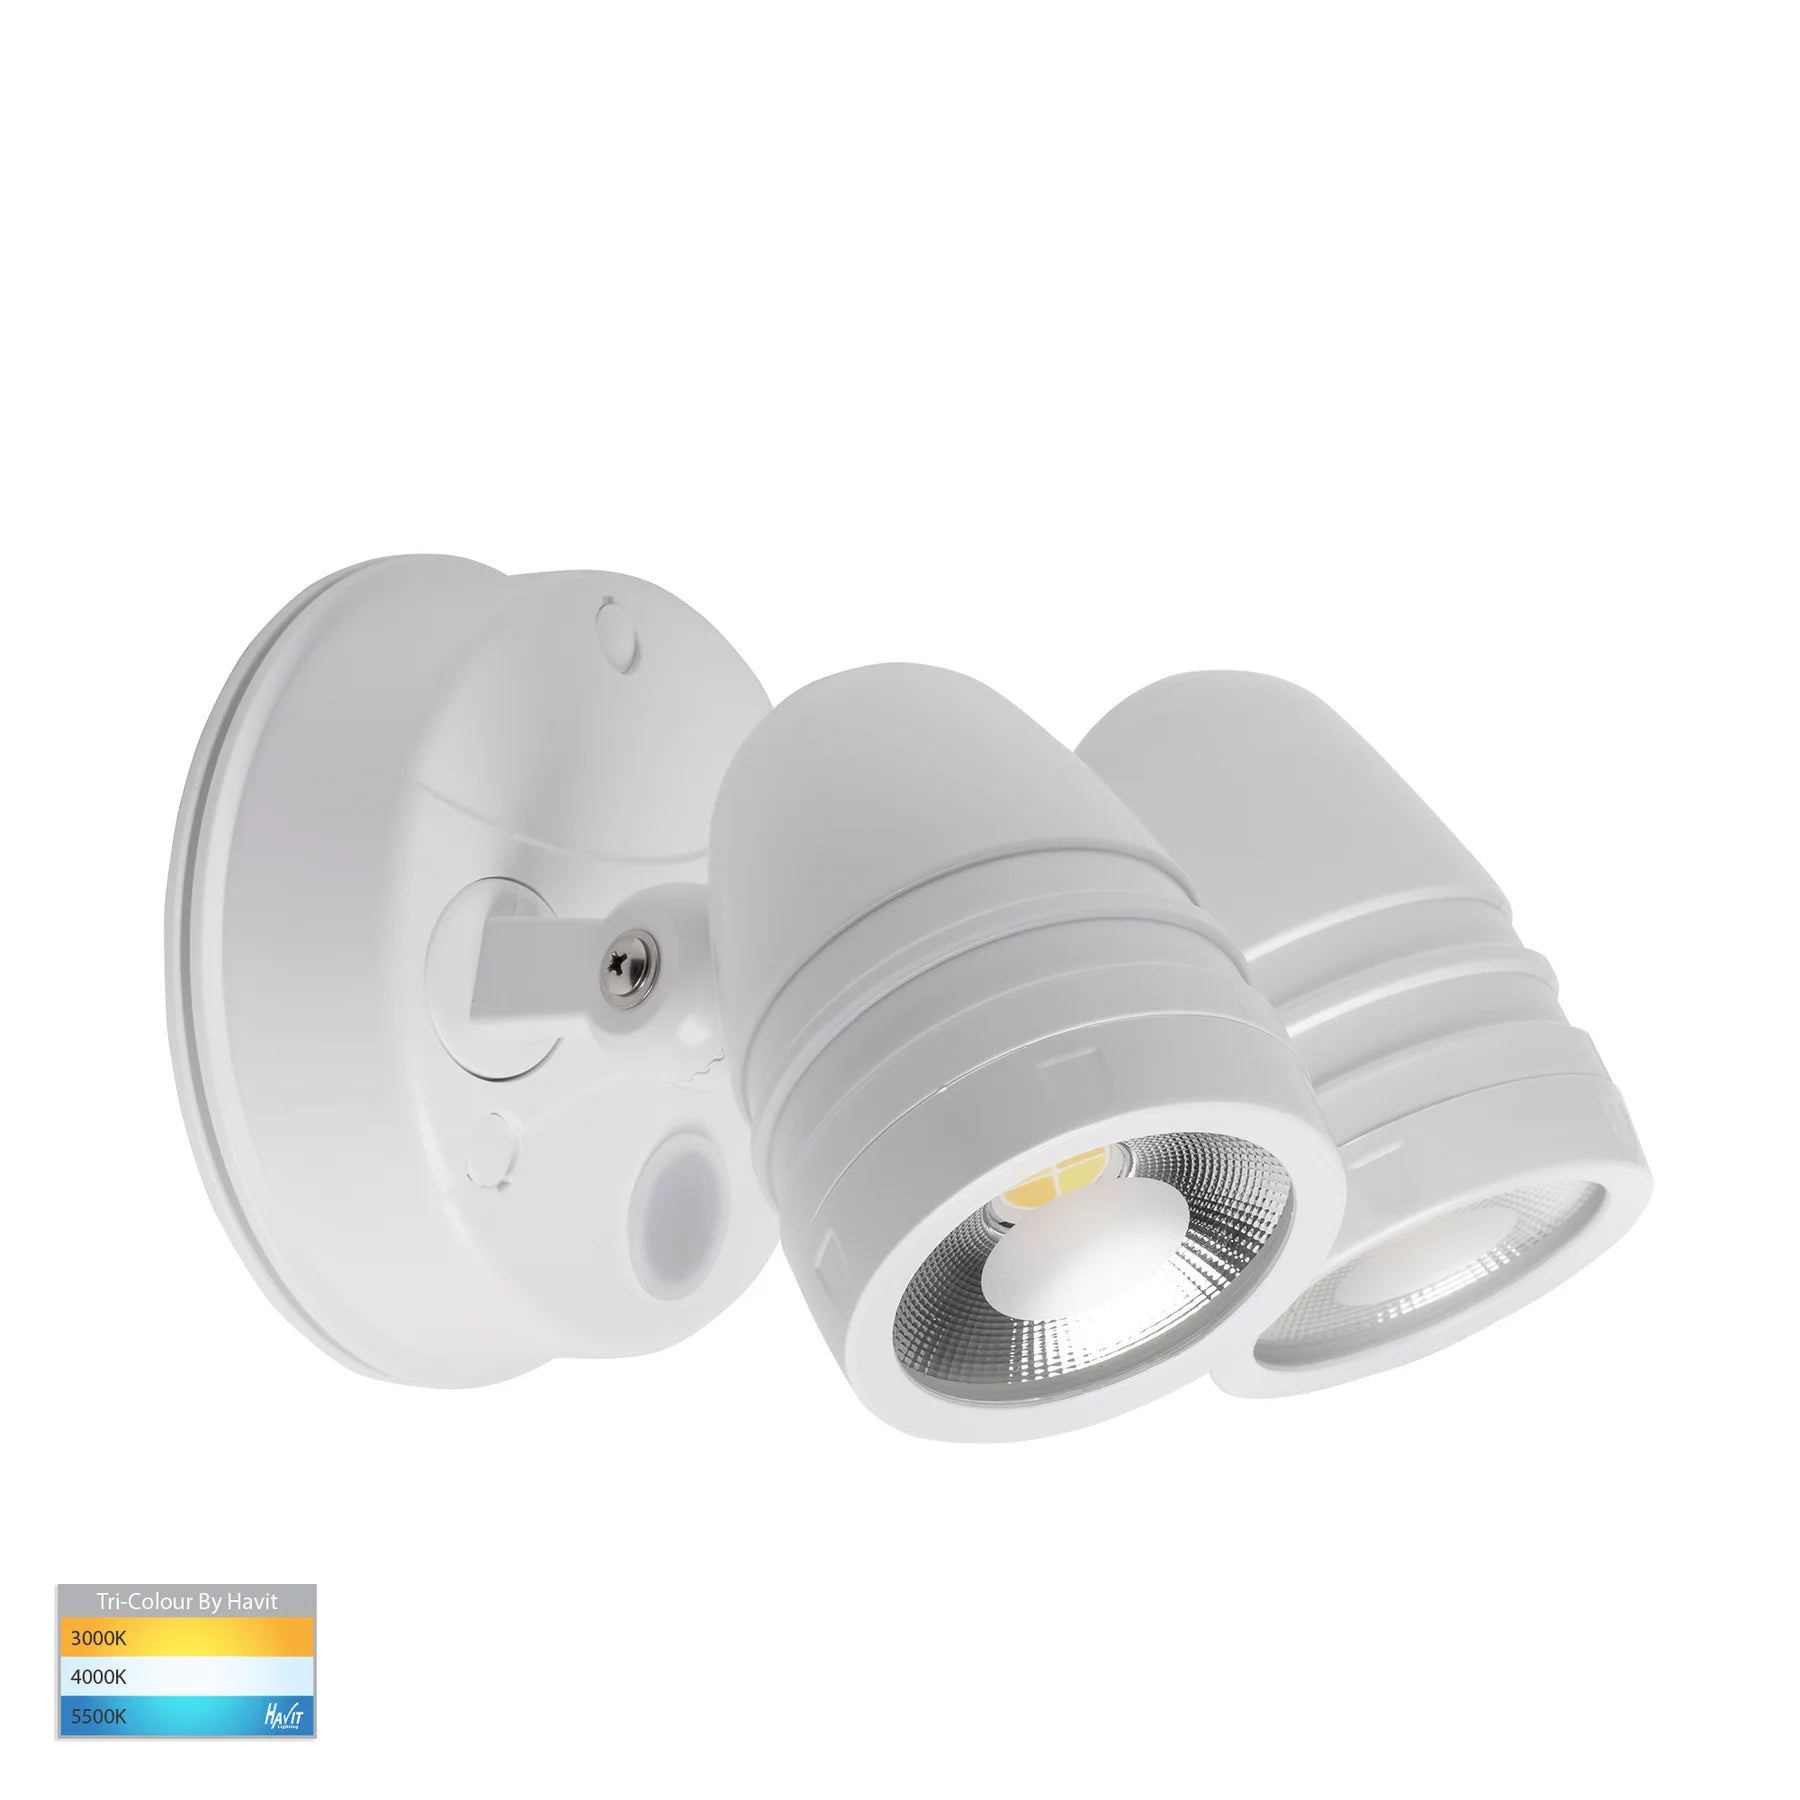 Buy Security Wall Lights Australia Focus Security Wall 2 Lights Adjustable 240V White 3 CCT with Sensor - HV3794T-WHT